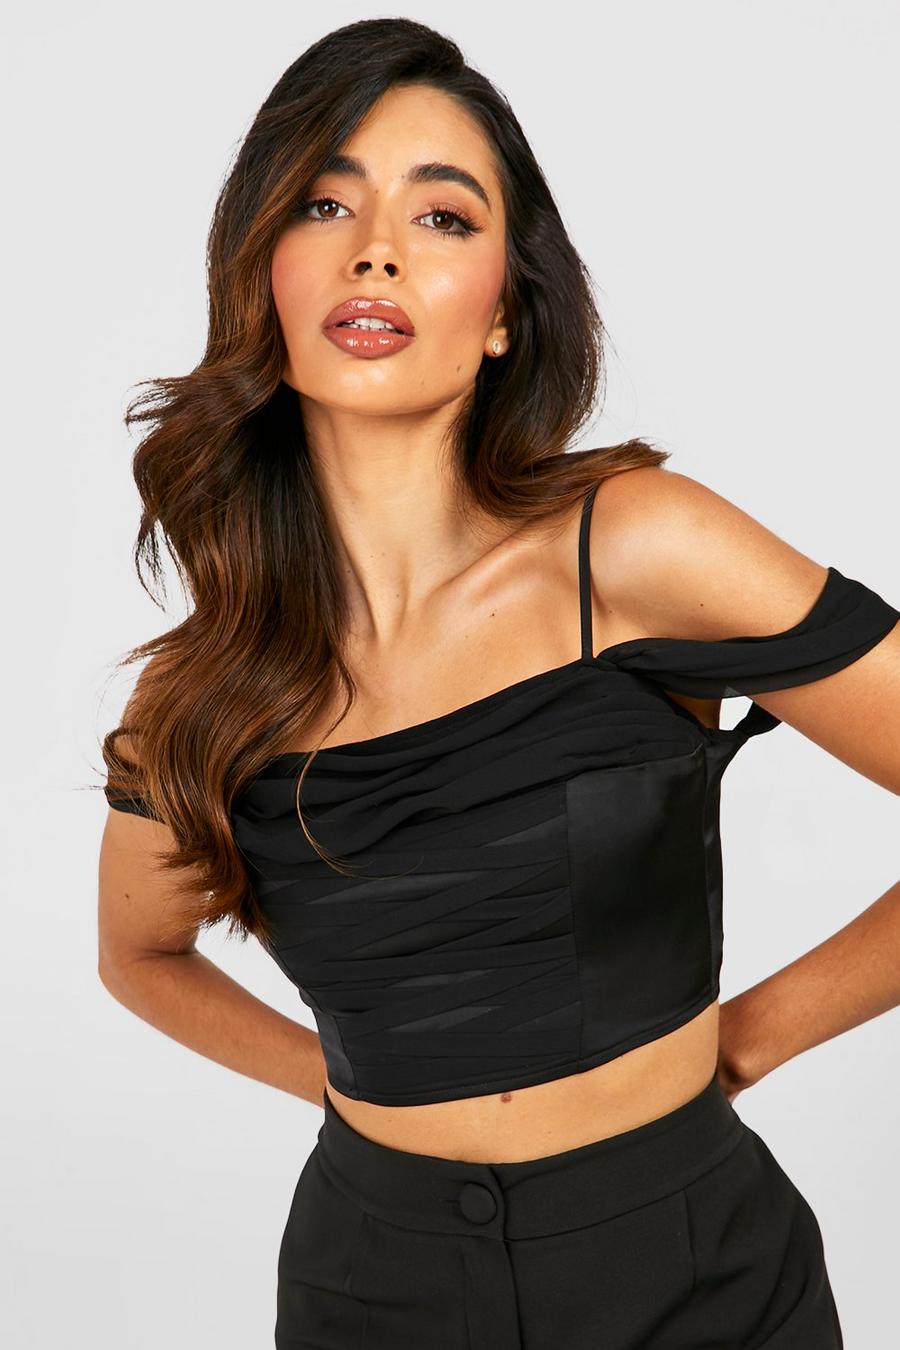 Missguided Lace Cold Shoulder Crop Top Black, $42, Missguided